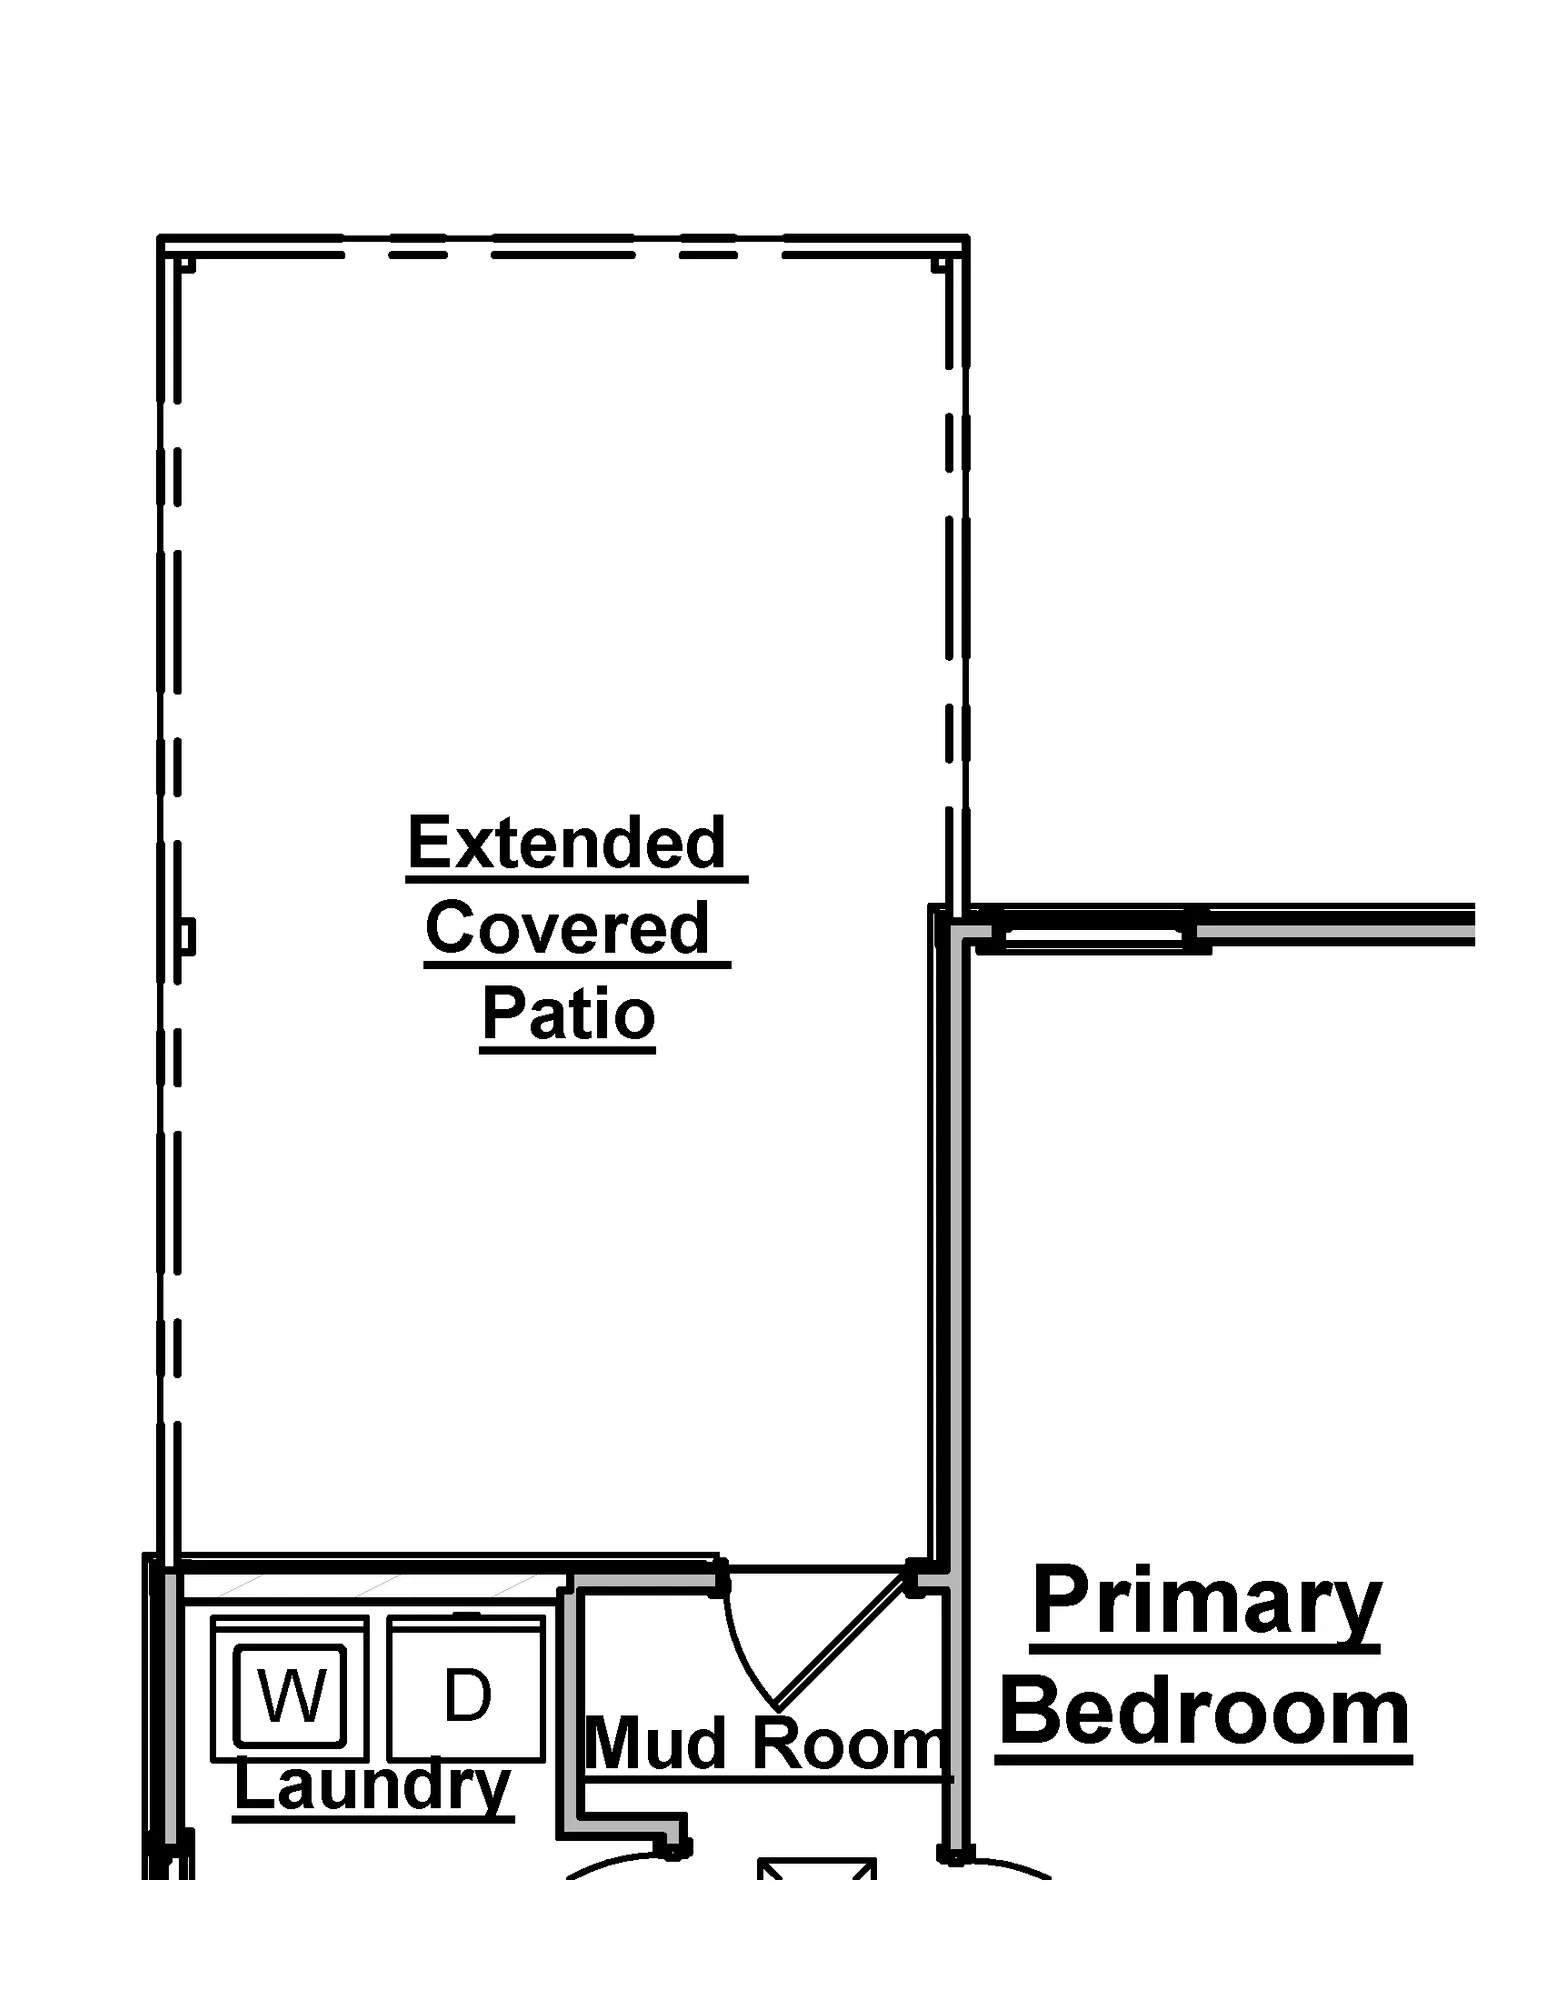 Covered Patio Extension - undefined